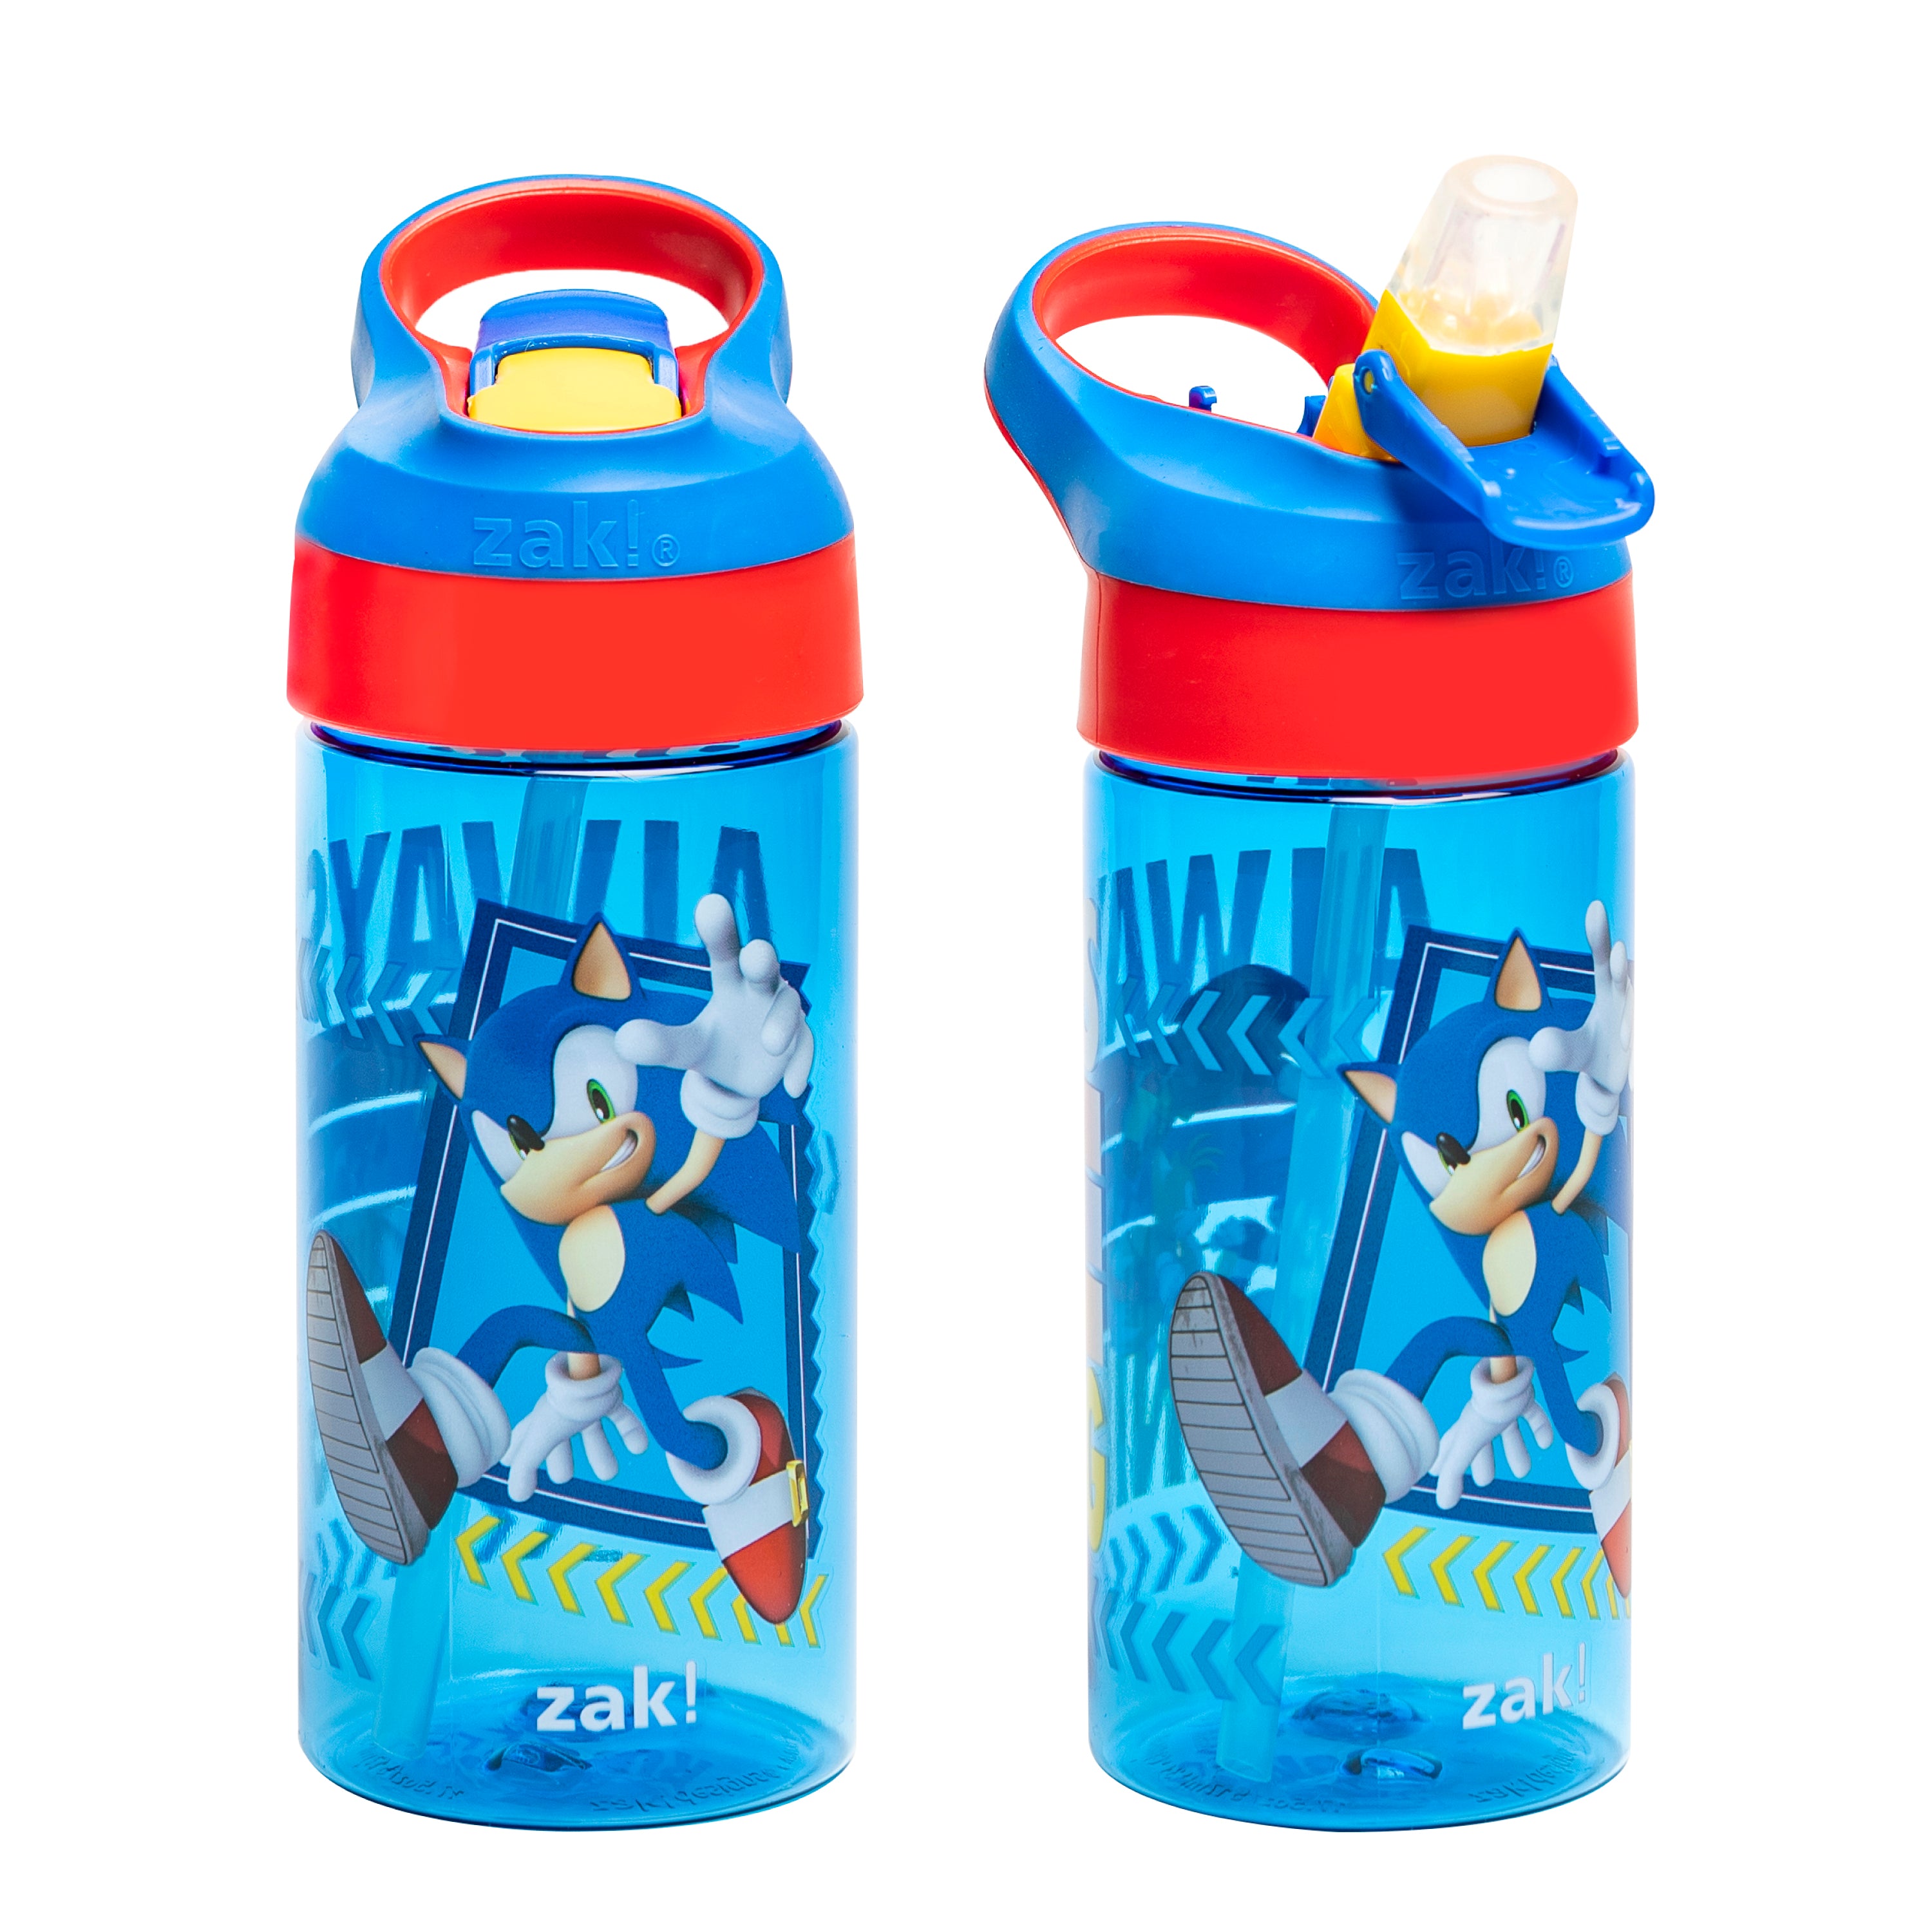 Surfboards and Palm Trees Kids Leak Proof Water Bottles with Push